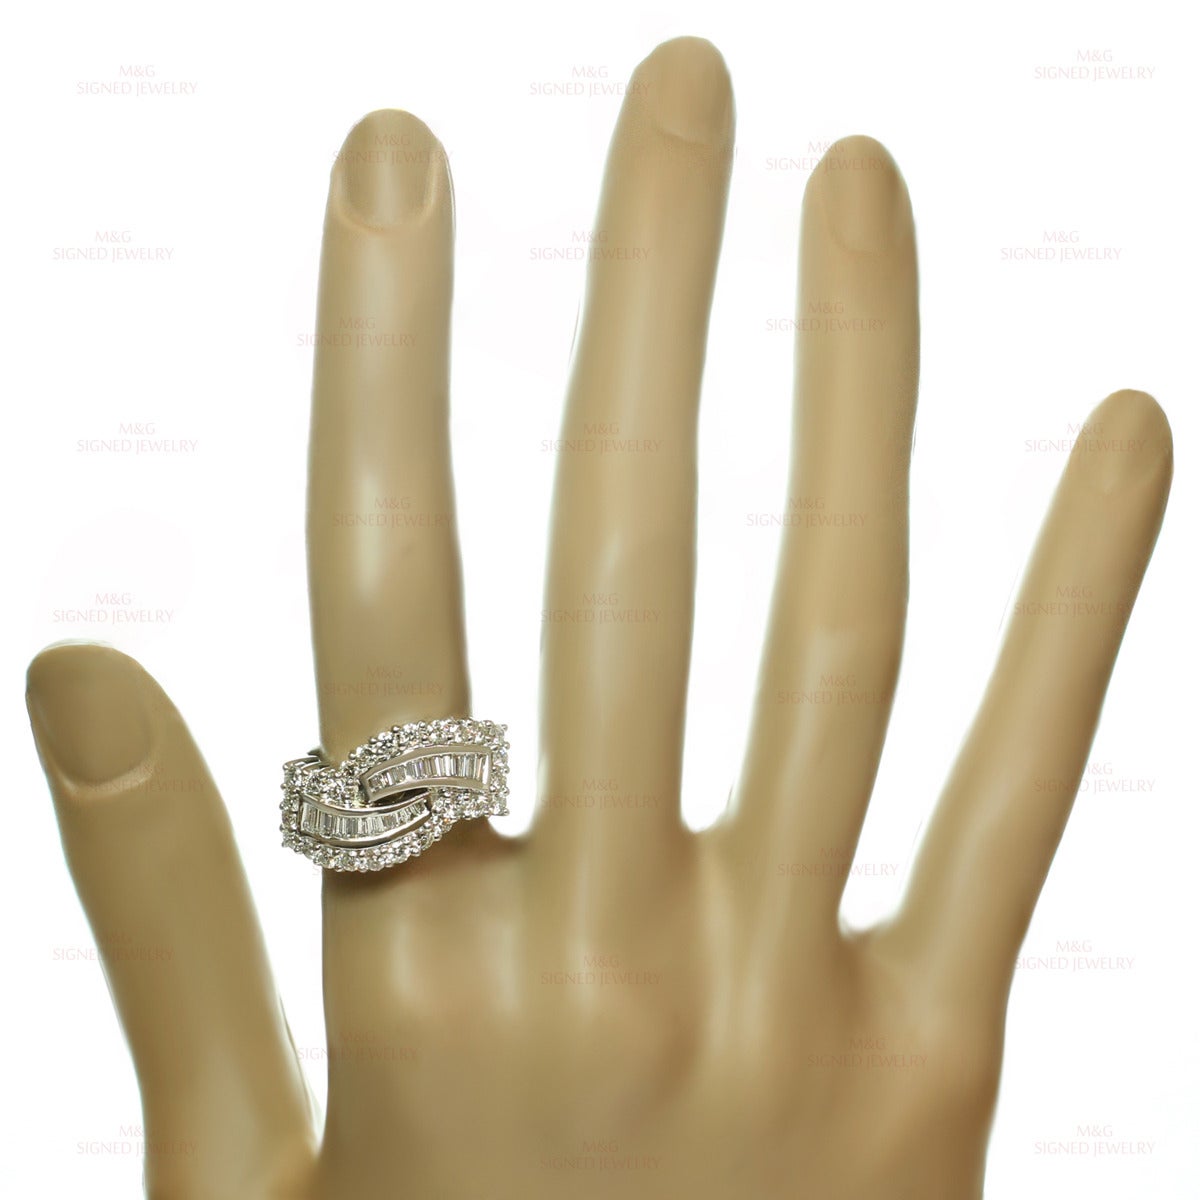 This elegant ring is crafted in 18k white gold and beautifully set G-H VS1-VS2 diamonds, 20 baguette-cut and 26 round brilliant-cut diamonds of an estimated 1.94 carats. Made in United States circa 1990s. Measurements: 0.51